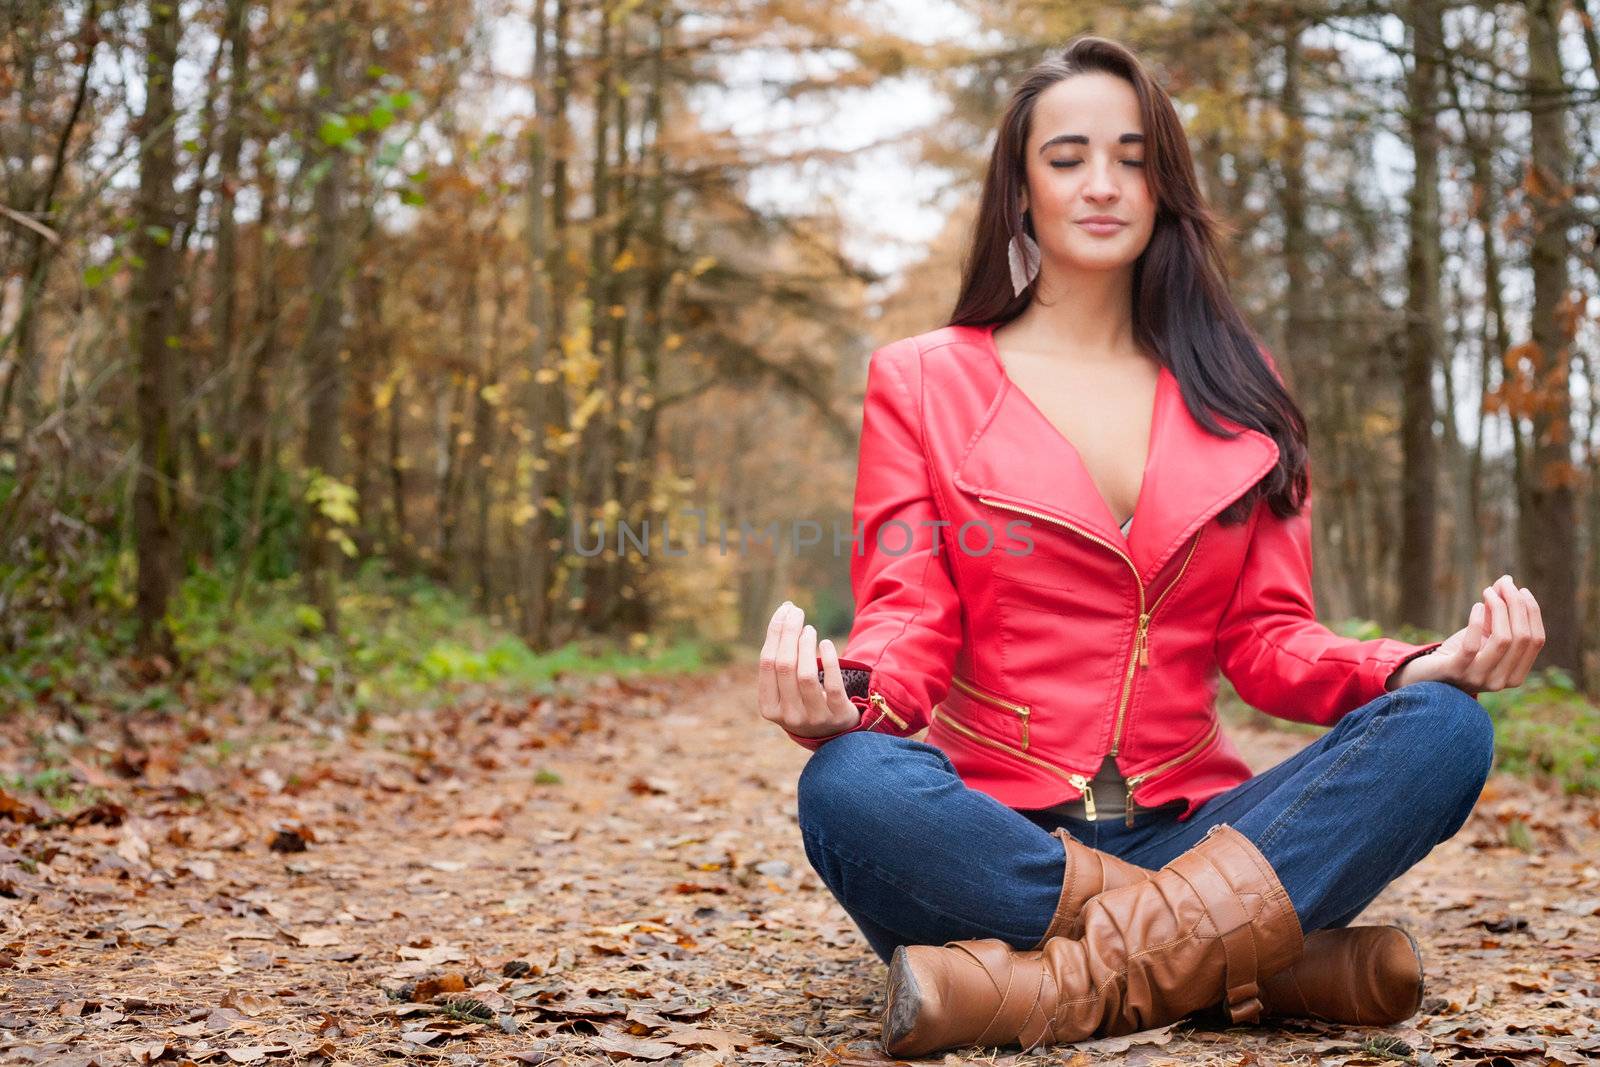 Meditation in the forest by DNFStyle